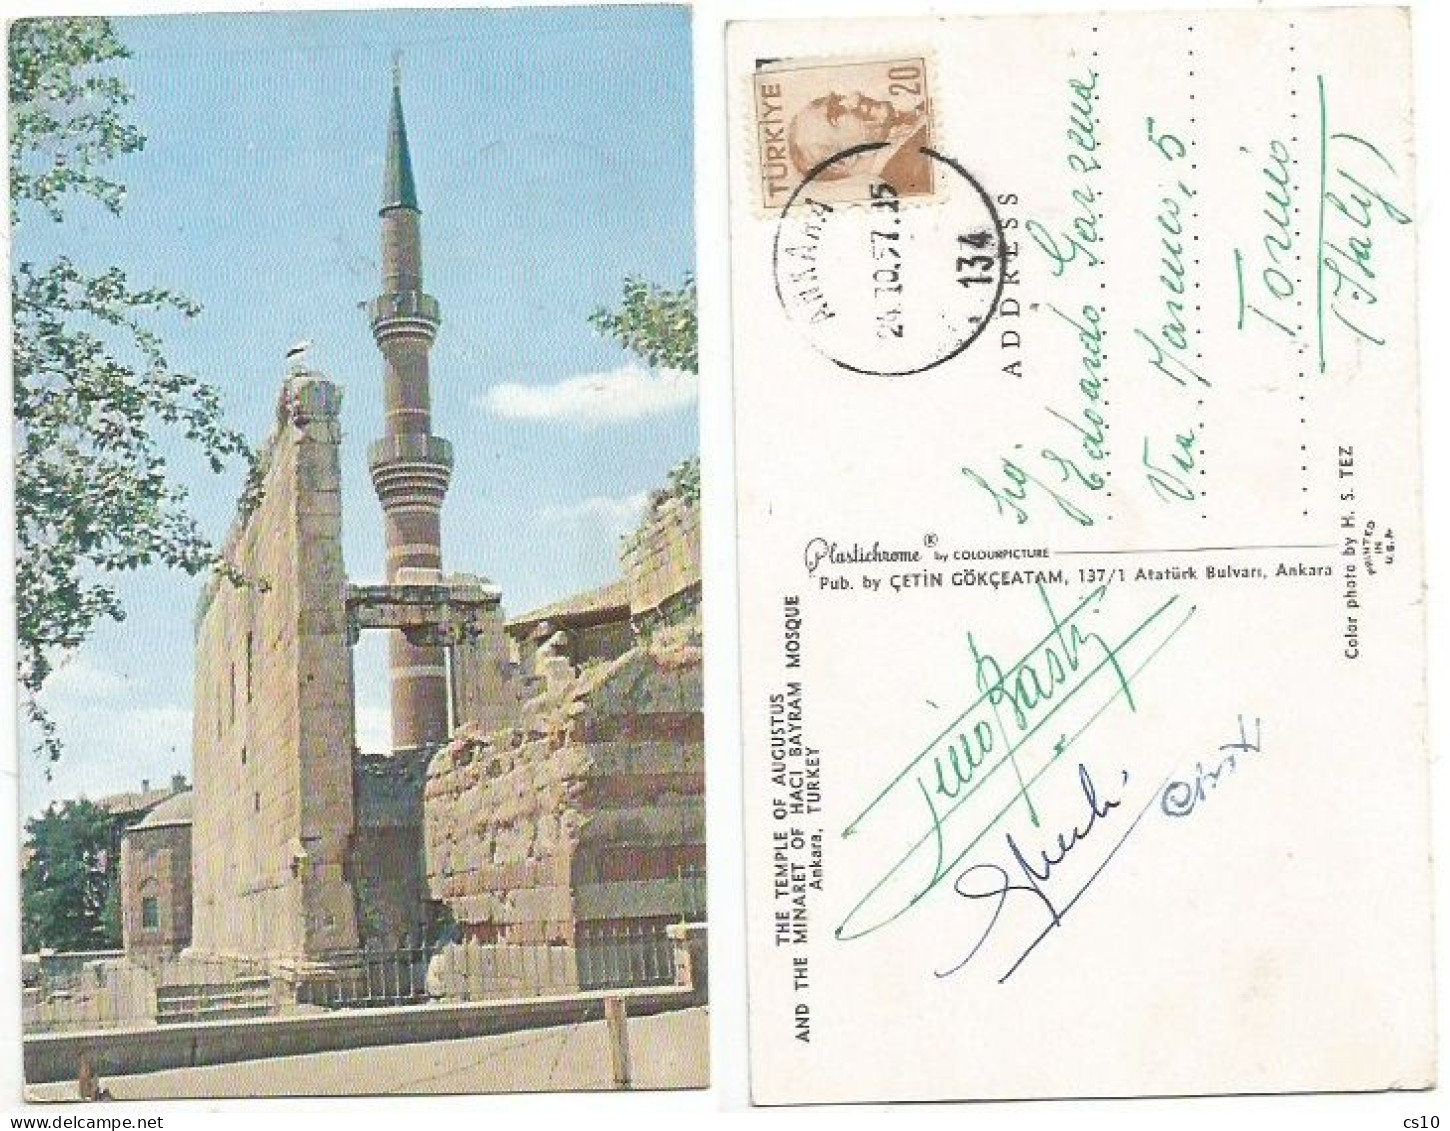 Turkey & Ottoman Empire Postal History Lot 26 Pcards mainly used to Europe Including Izmir Italy PM +2 PSC incl Variety